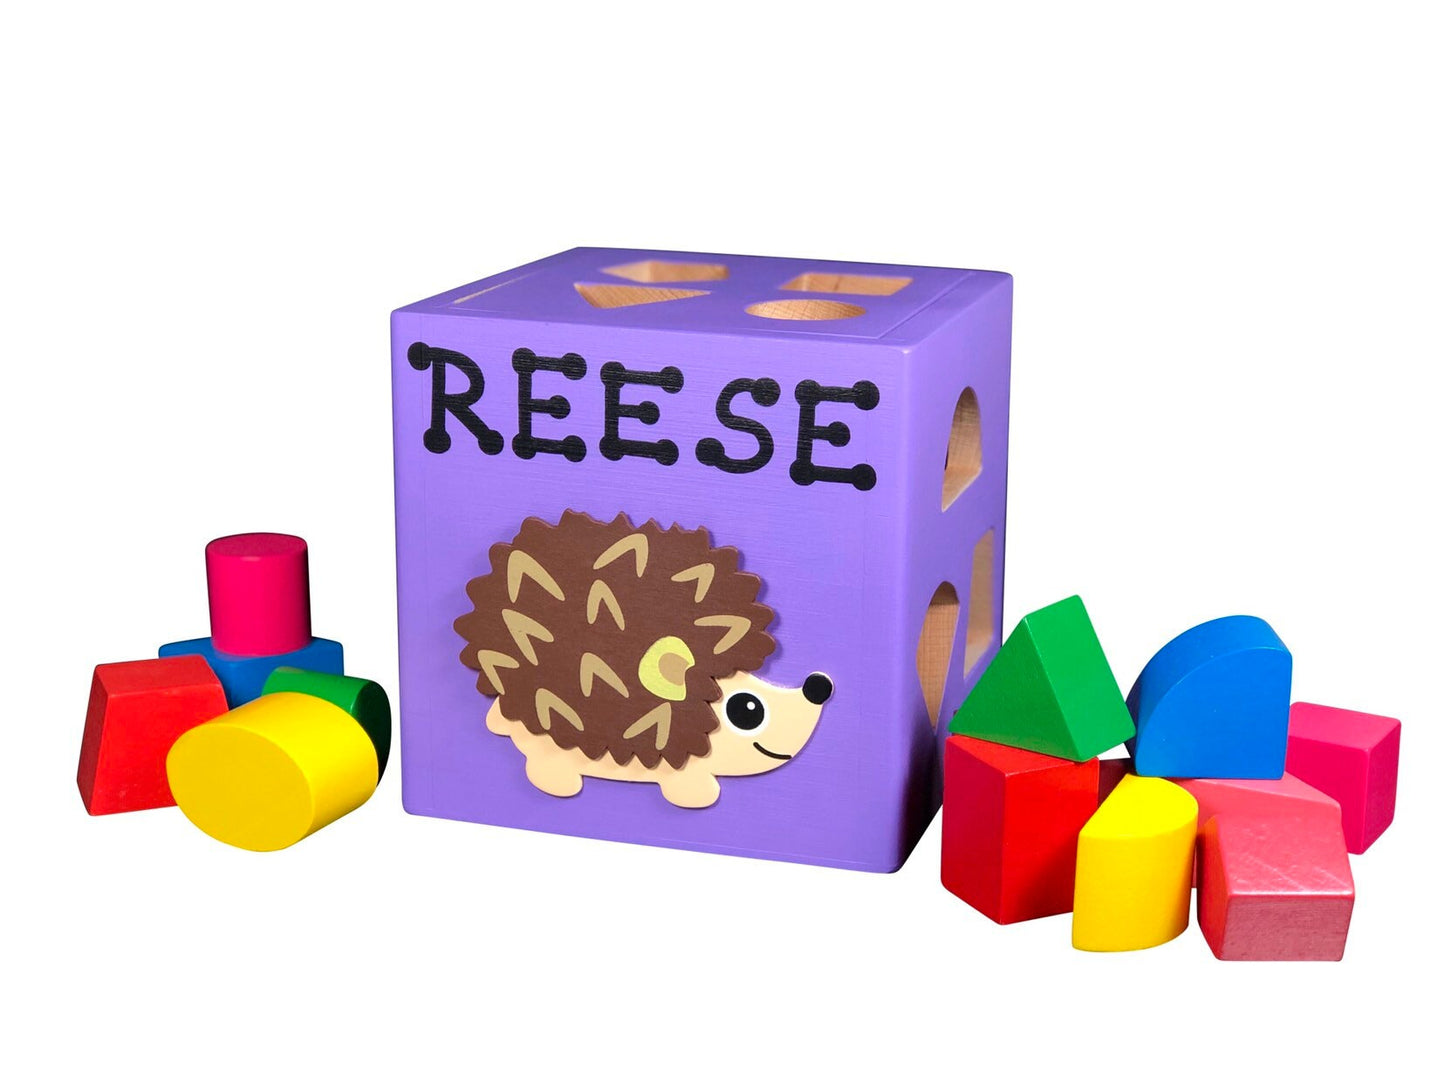 Personalized shape sorting cube / Turtle wood toy